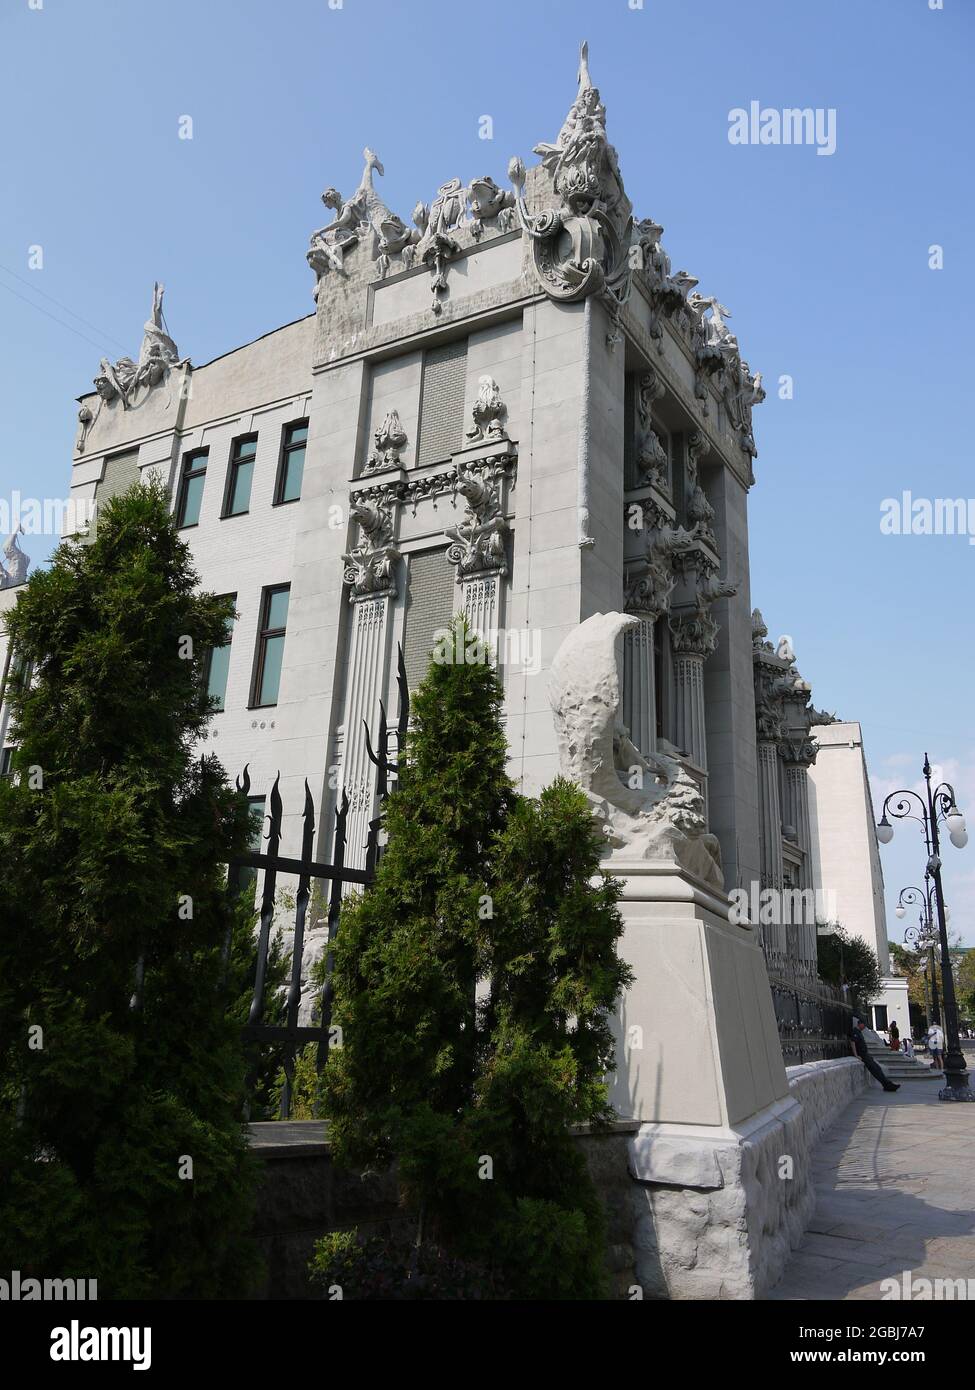 House with Chimaeras or Horodecki House, an Art Nouveau building located in the center of Kyiv, the capital of Ukraine Stock Photo